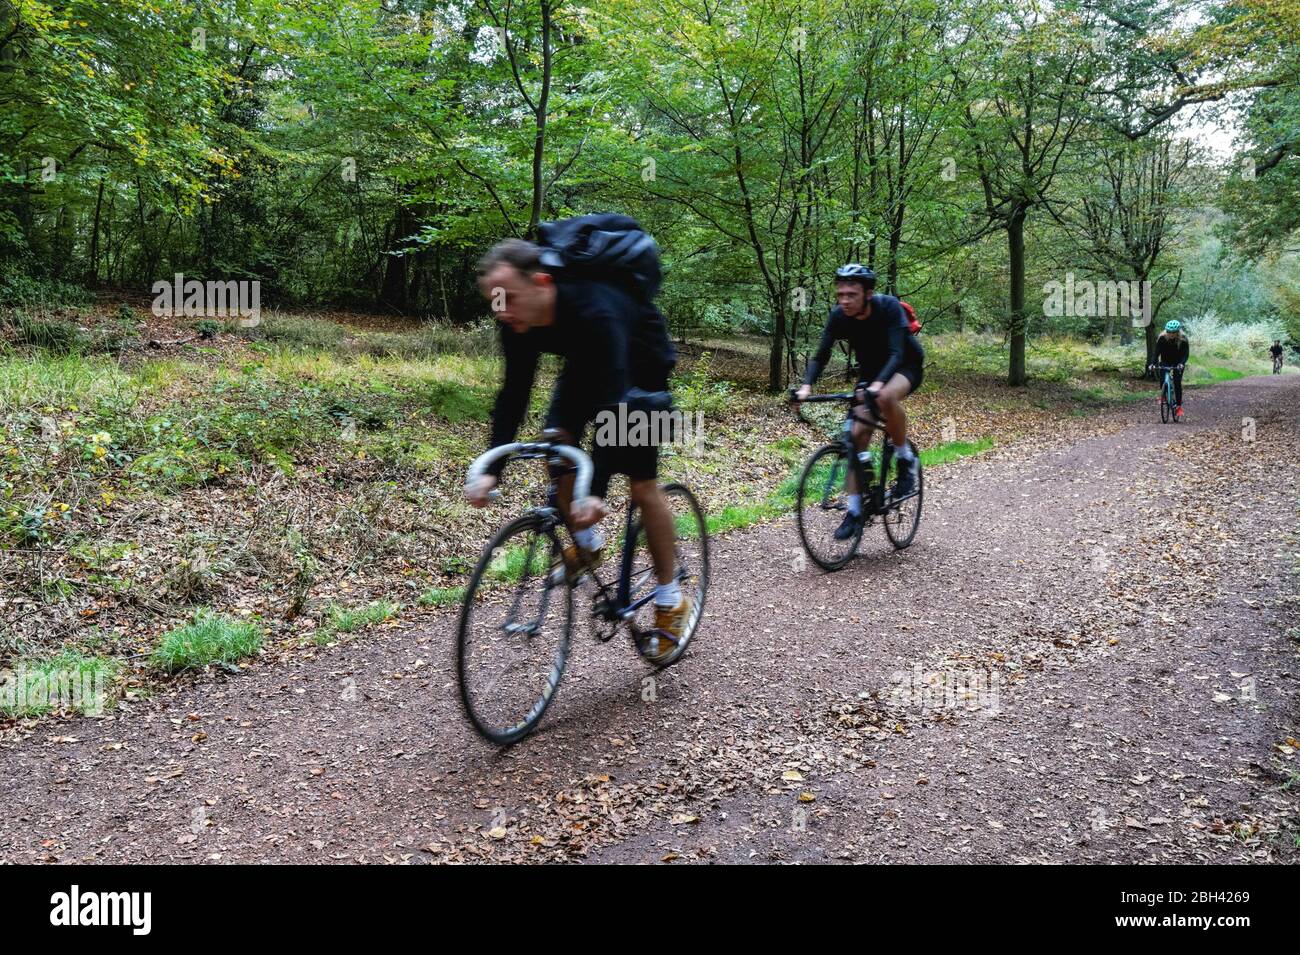 Cyclists in Epping Forest, Essex, England, United Kingdom UK Stock Photo